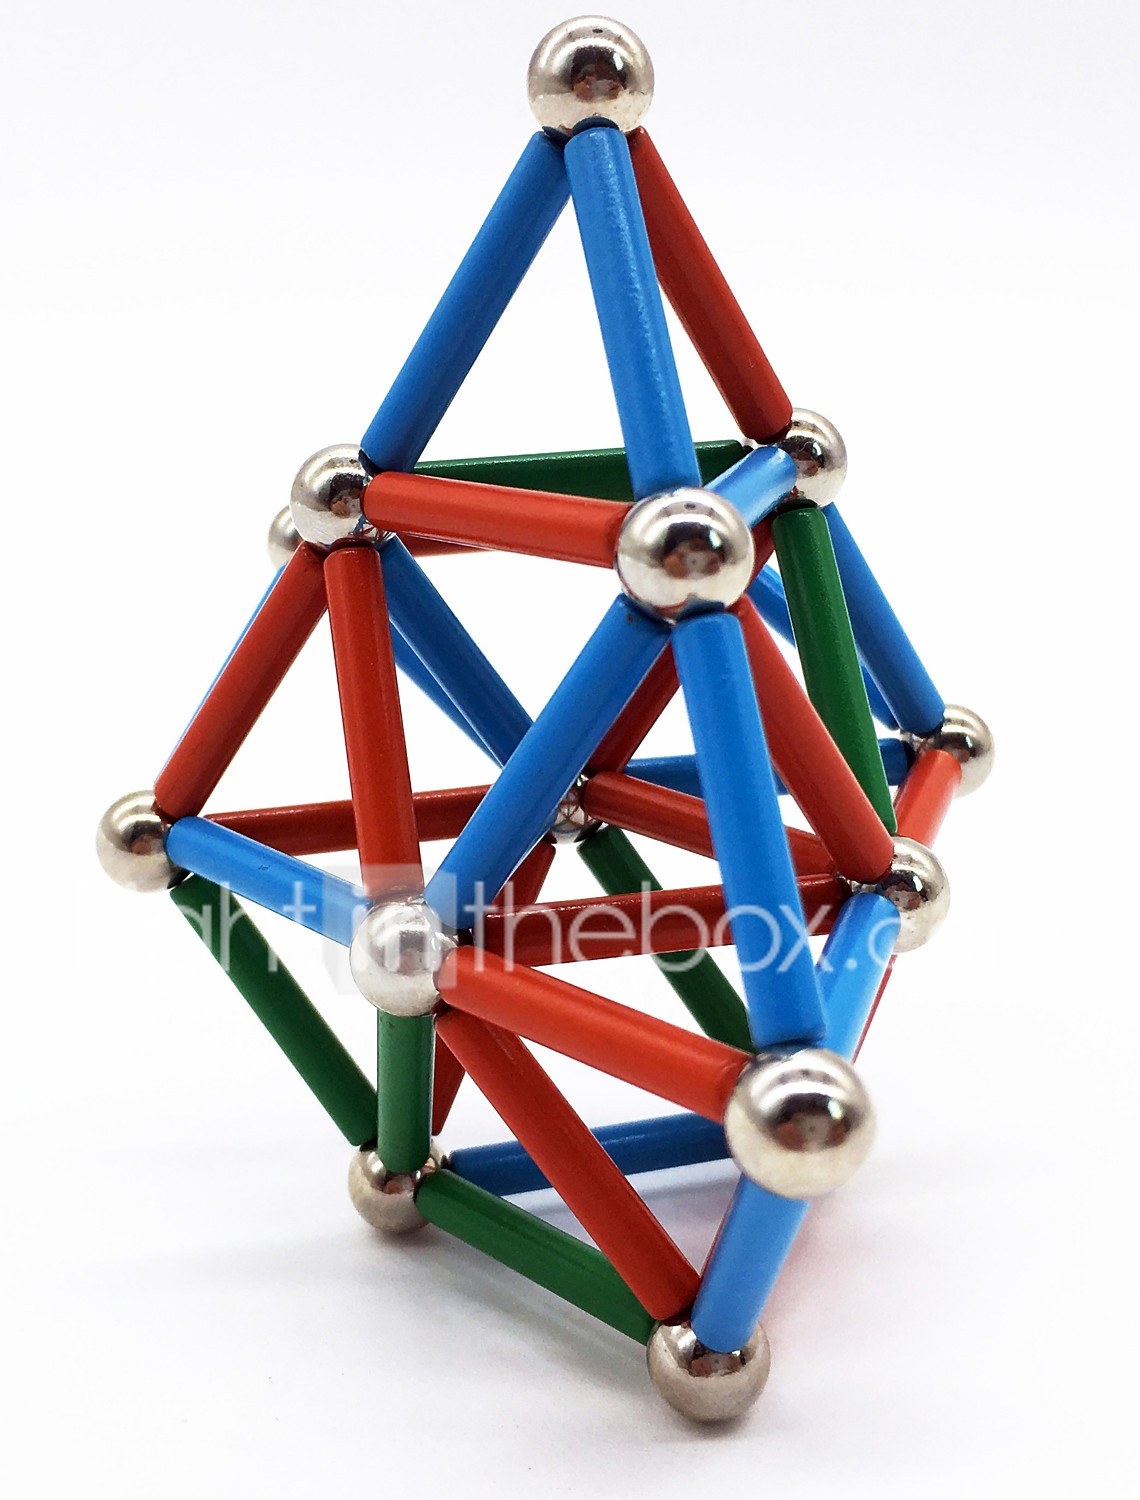 magnetic ball and stick toy